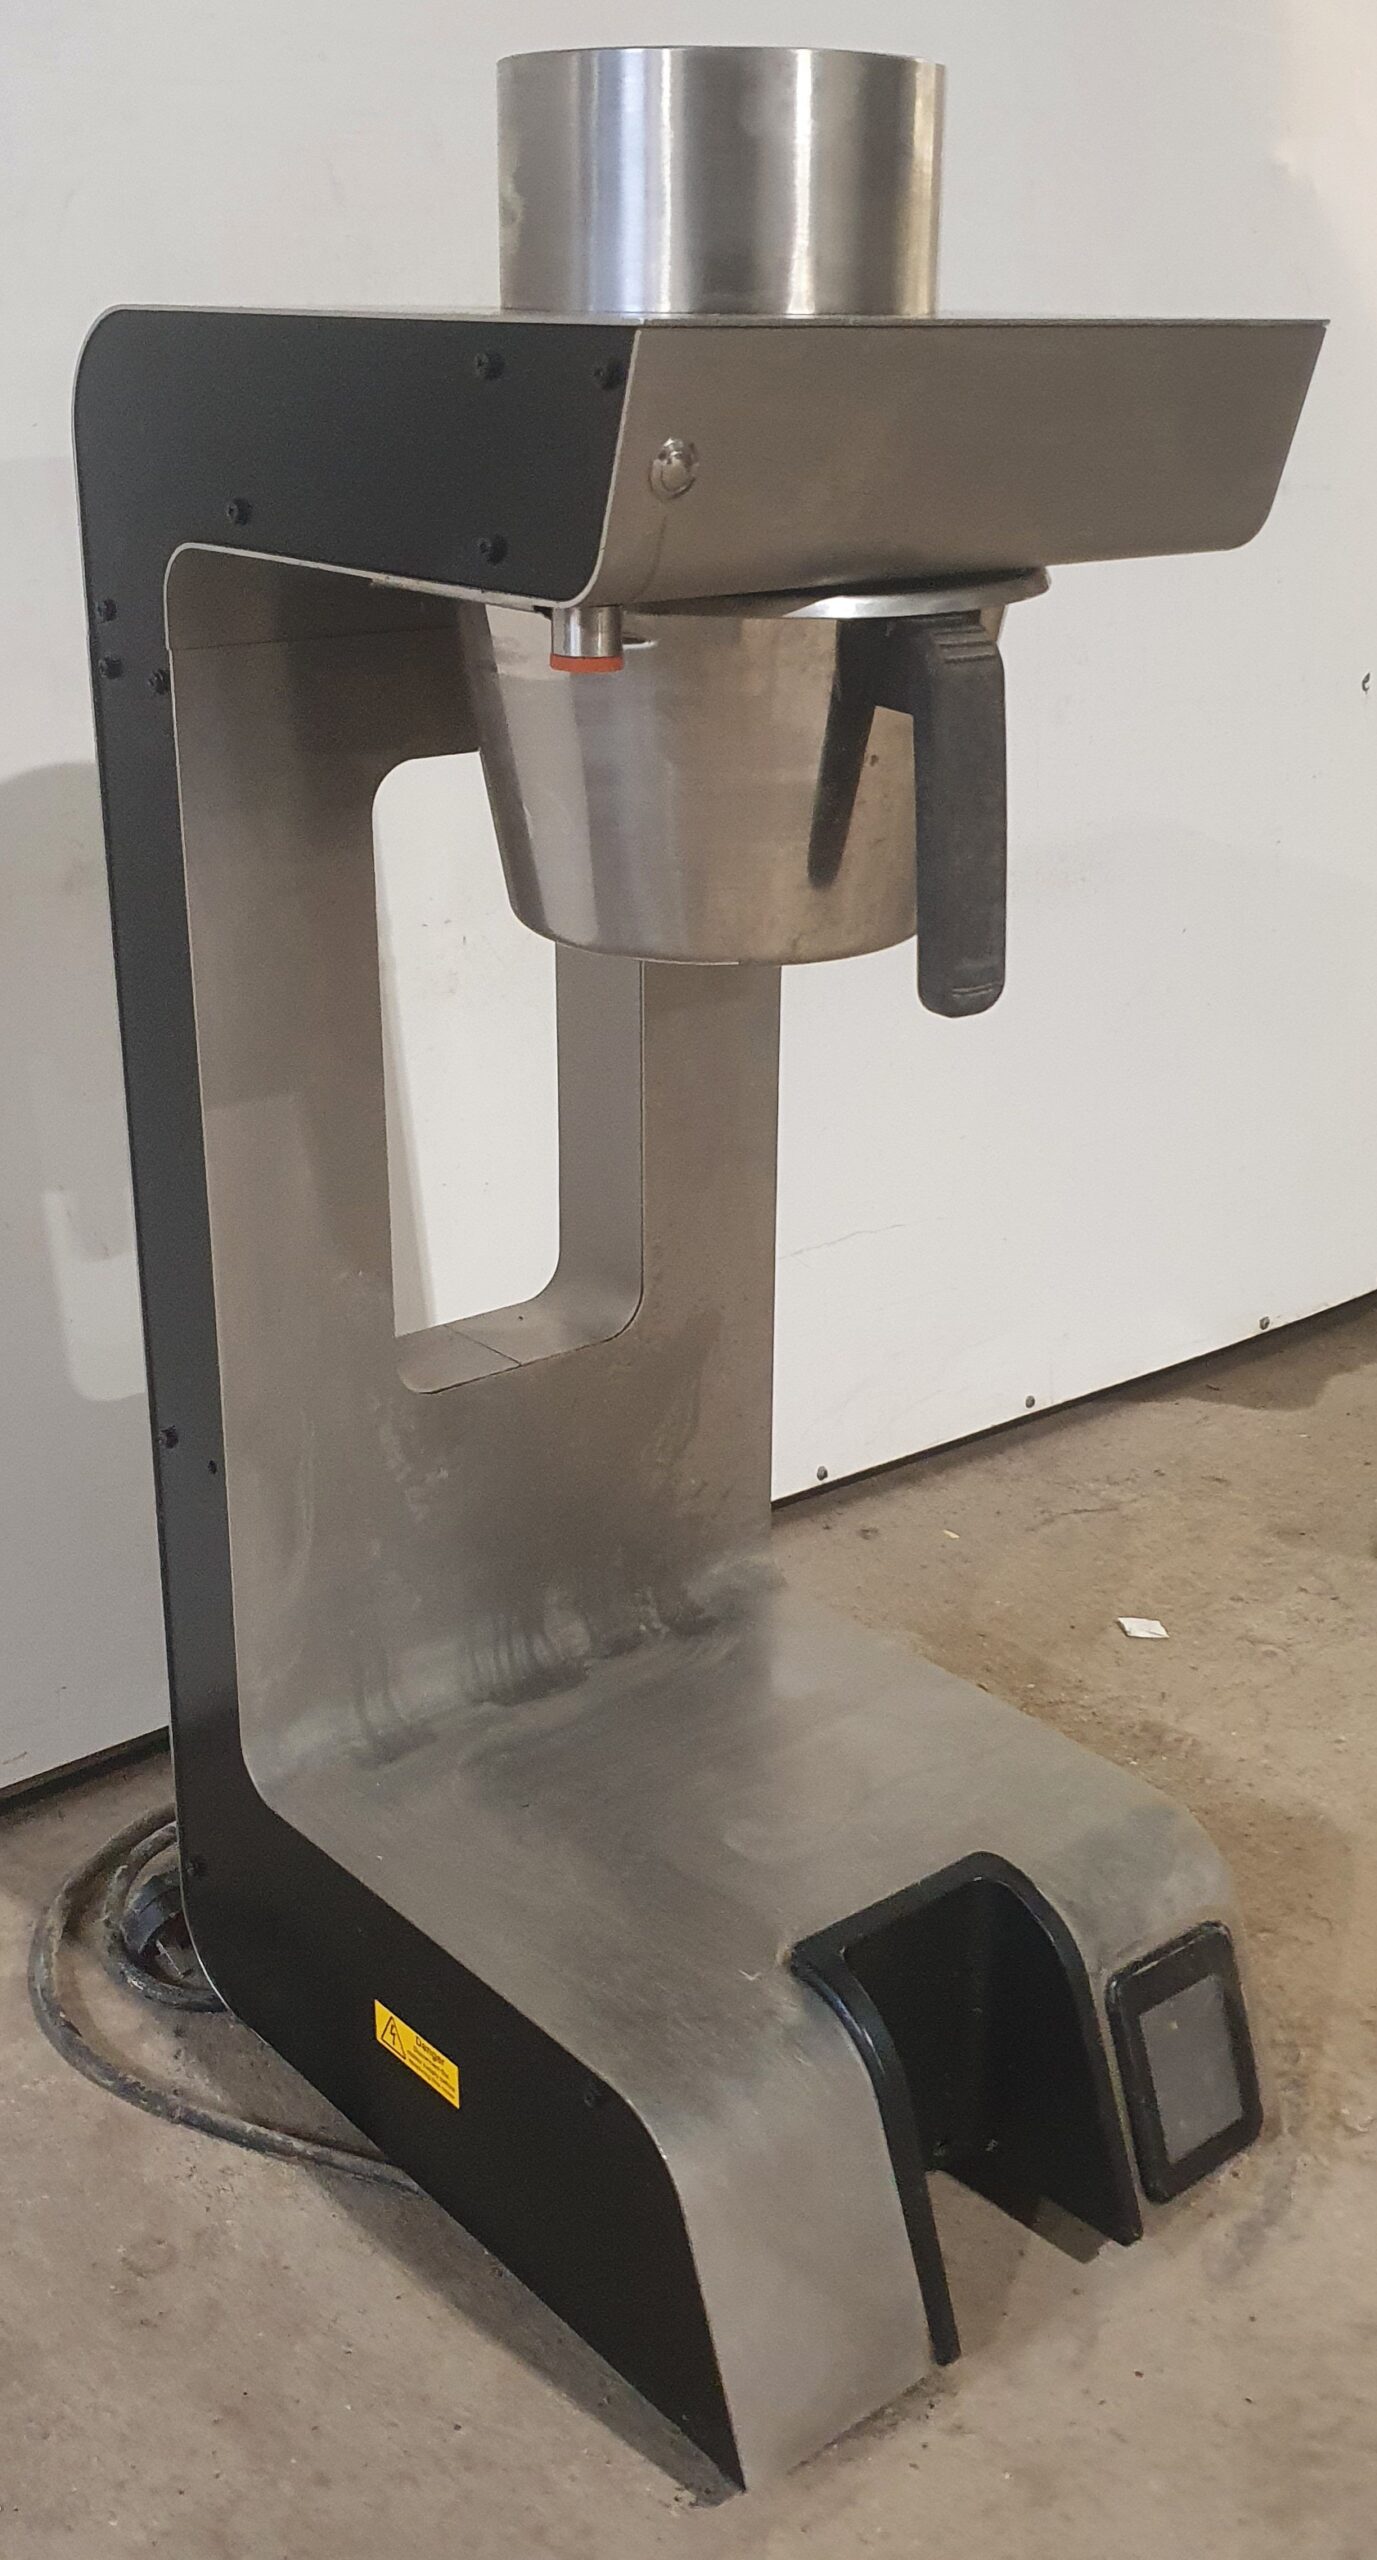 MARCO Jet 6 Bulk Brewer with Urn